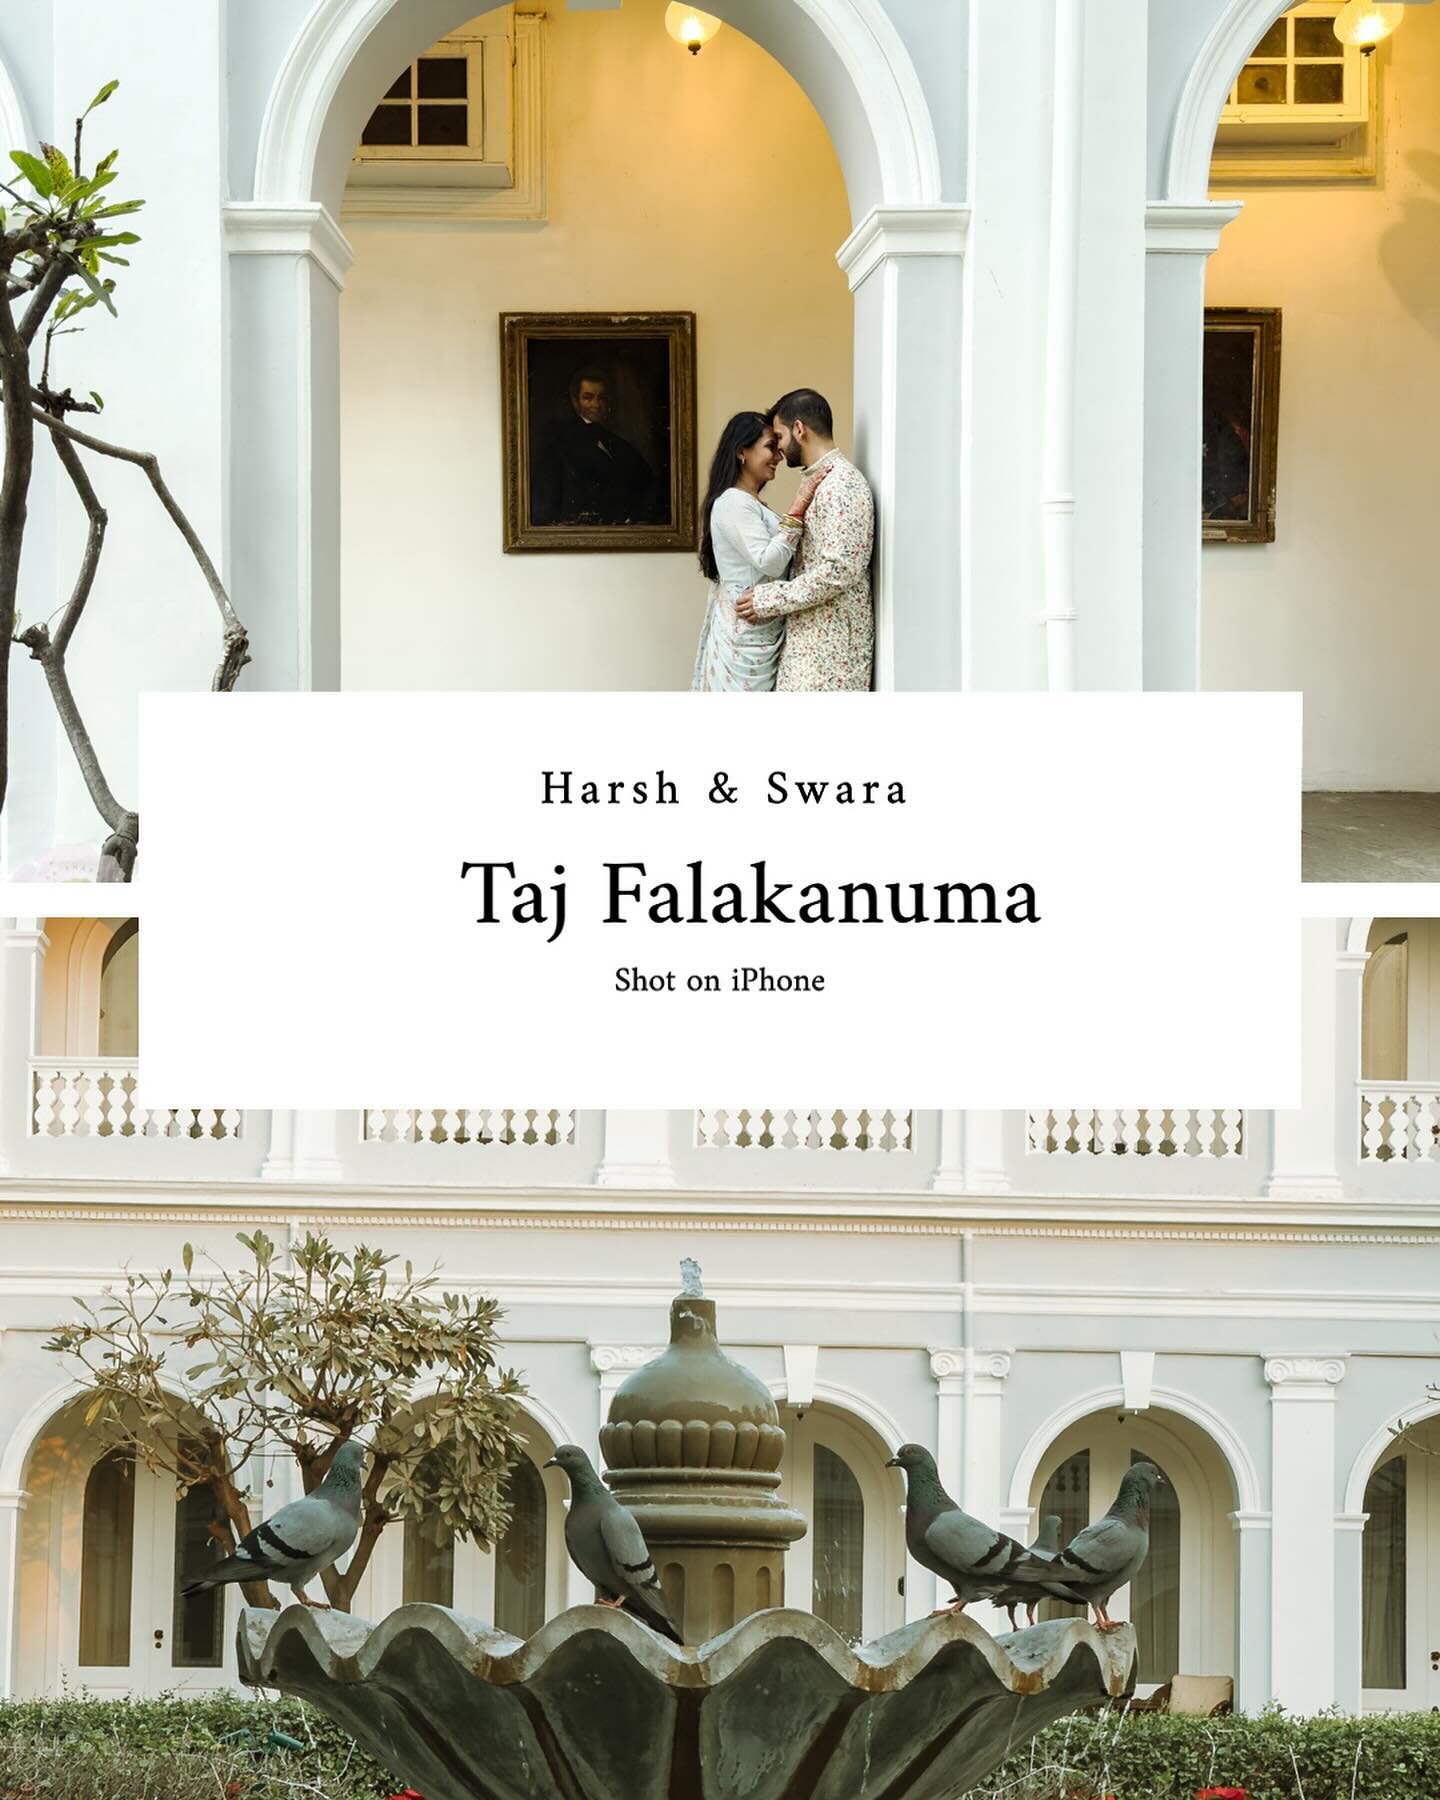 ✨ When Life Hands You iPhones at Taj Falaknuma!

So, imagine this: You&rsquo;re all set for a majestic photoshoot at the iconic Taj Falaknuma and... plot twist!  Somewhere in the communication mix-up, the &lsquo;couple&rsquo; part of the photoshoot w